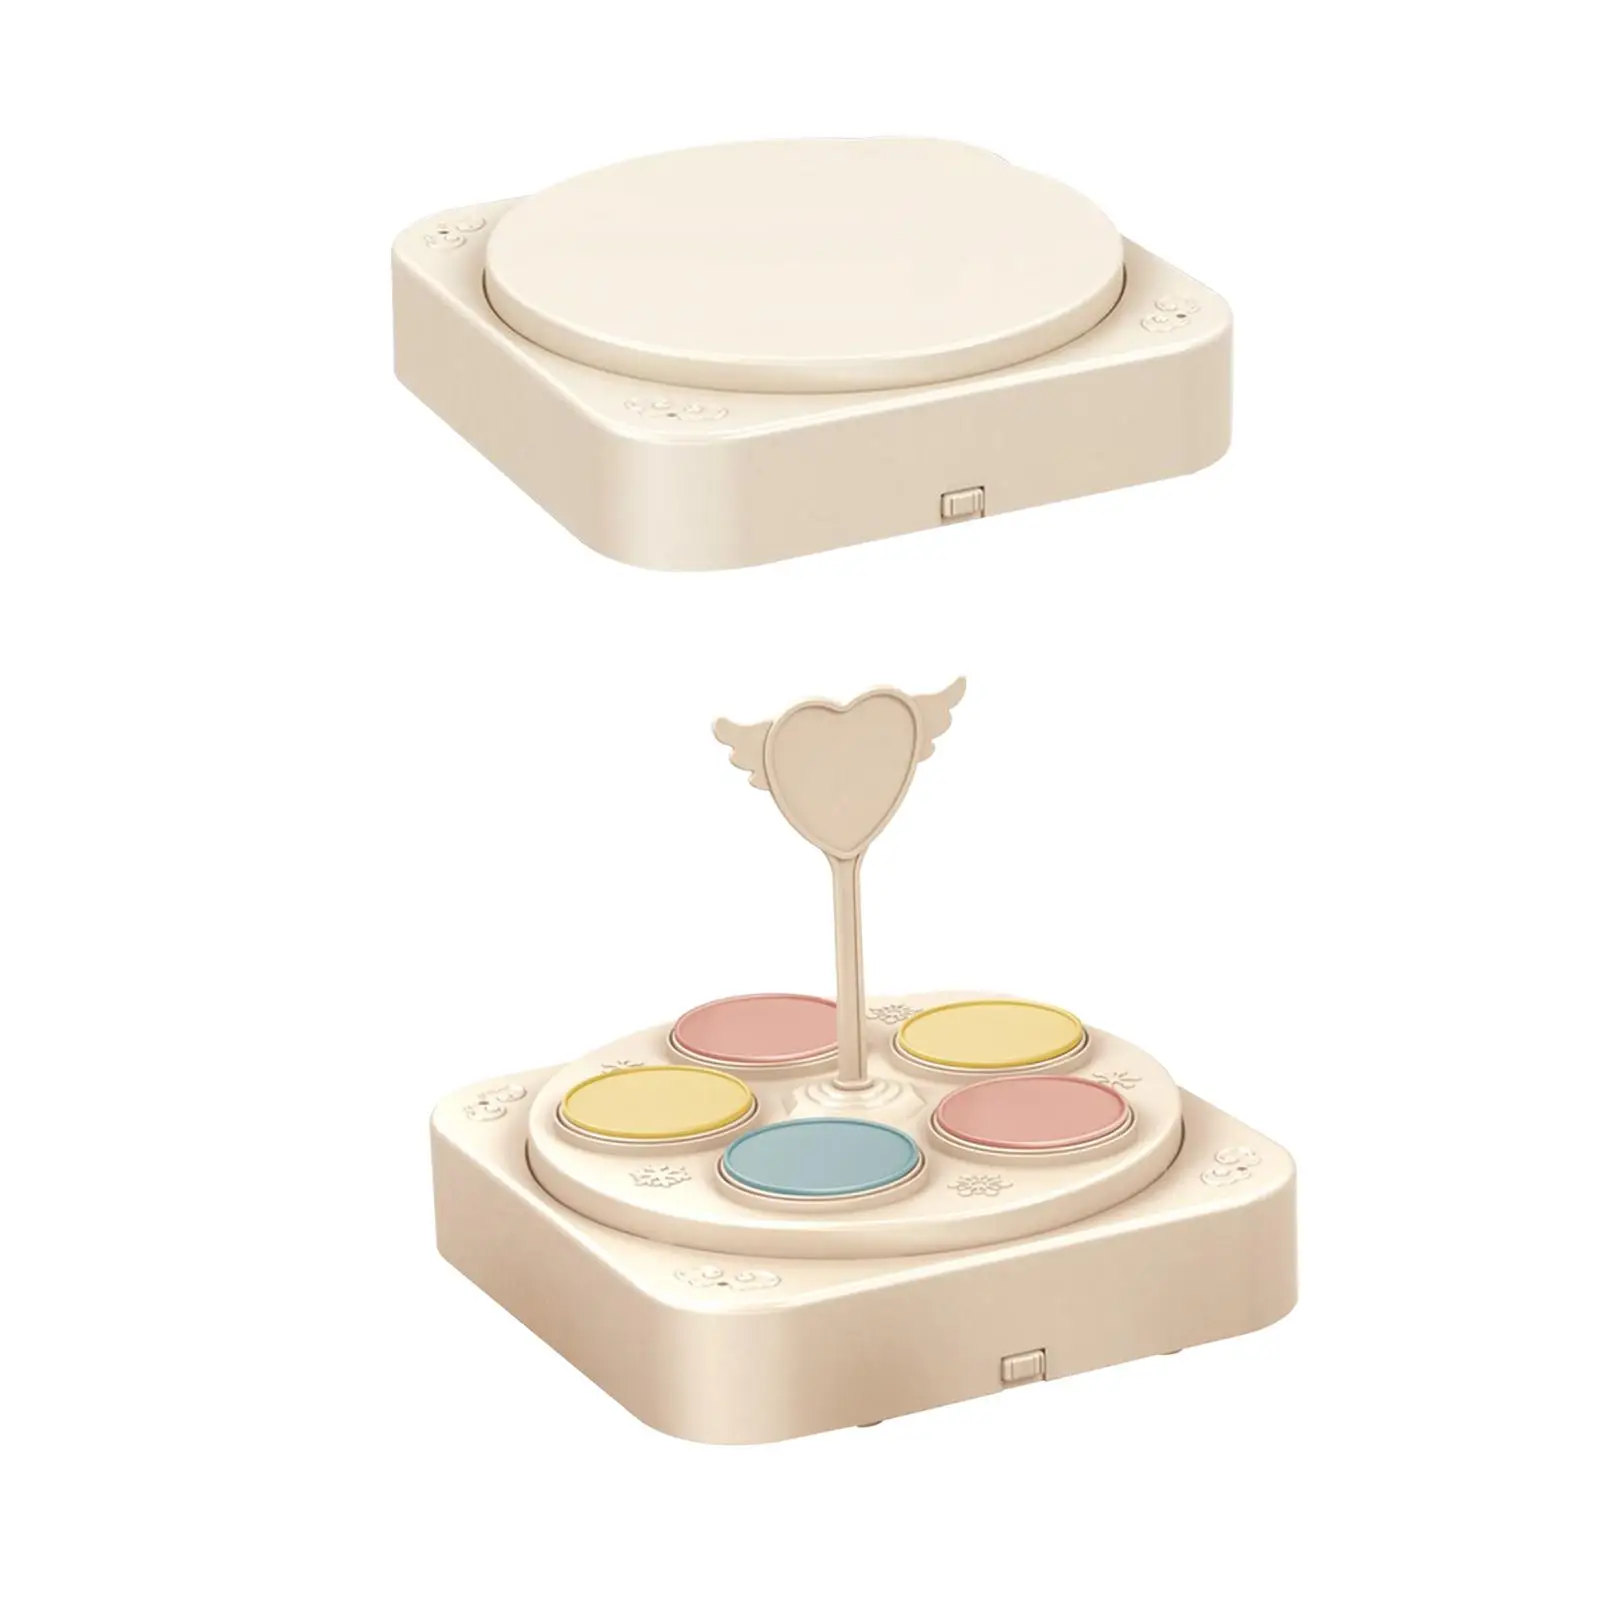 Rotary Baking Display Tray Cake Stand with Music Cake turnable for Gift Baking Wedding